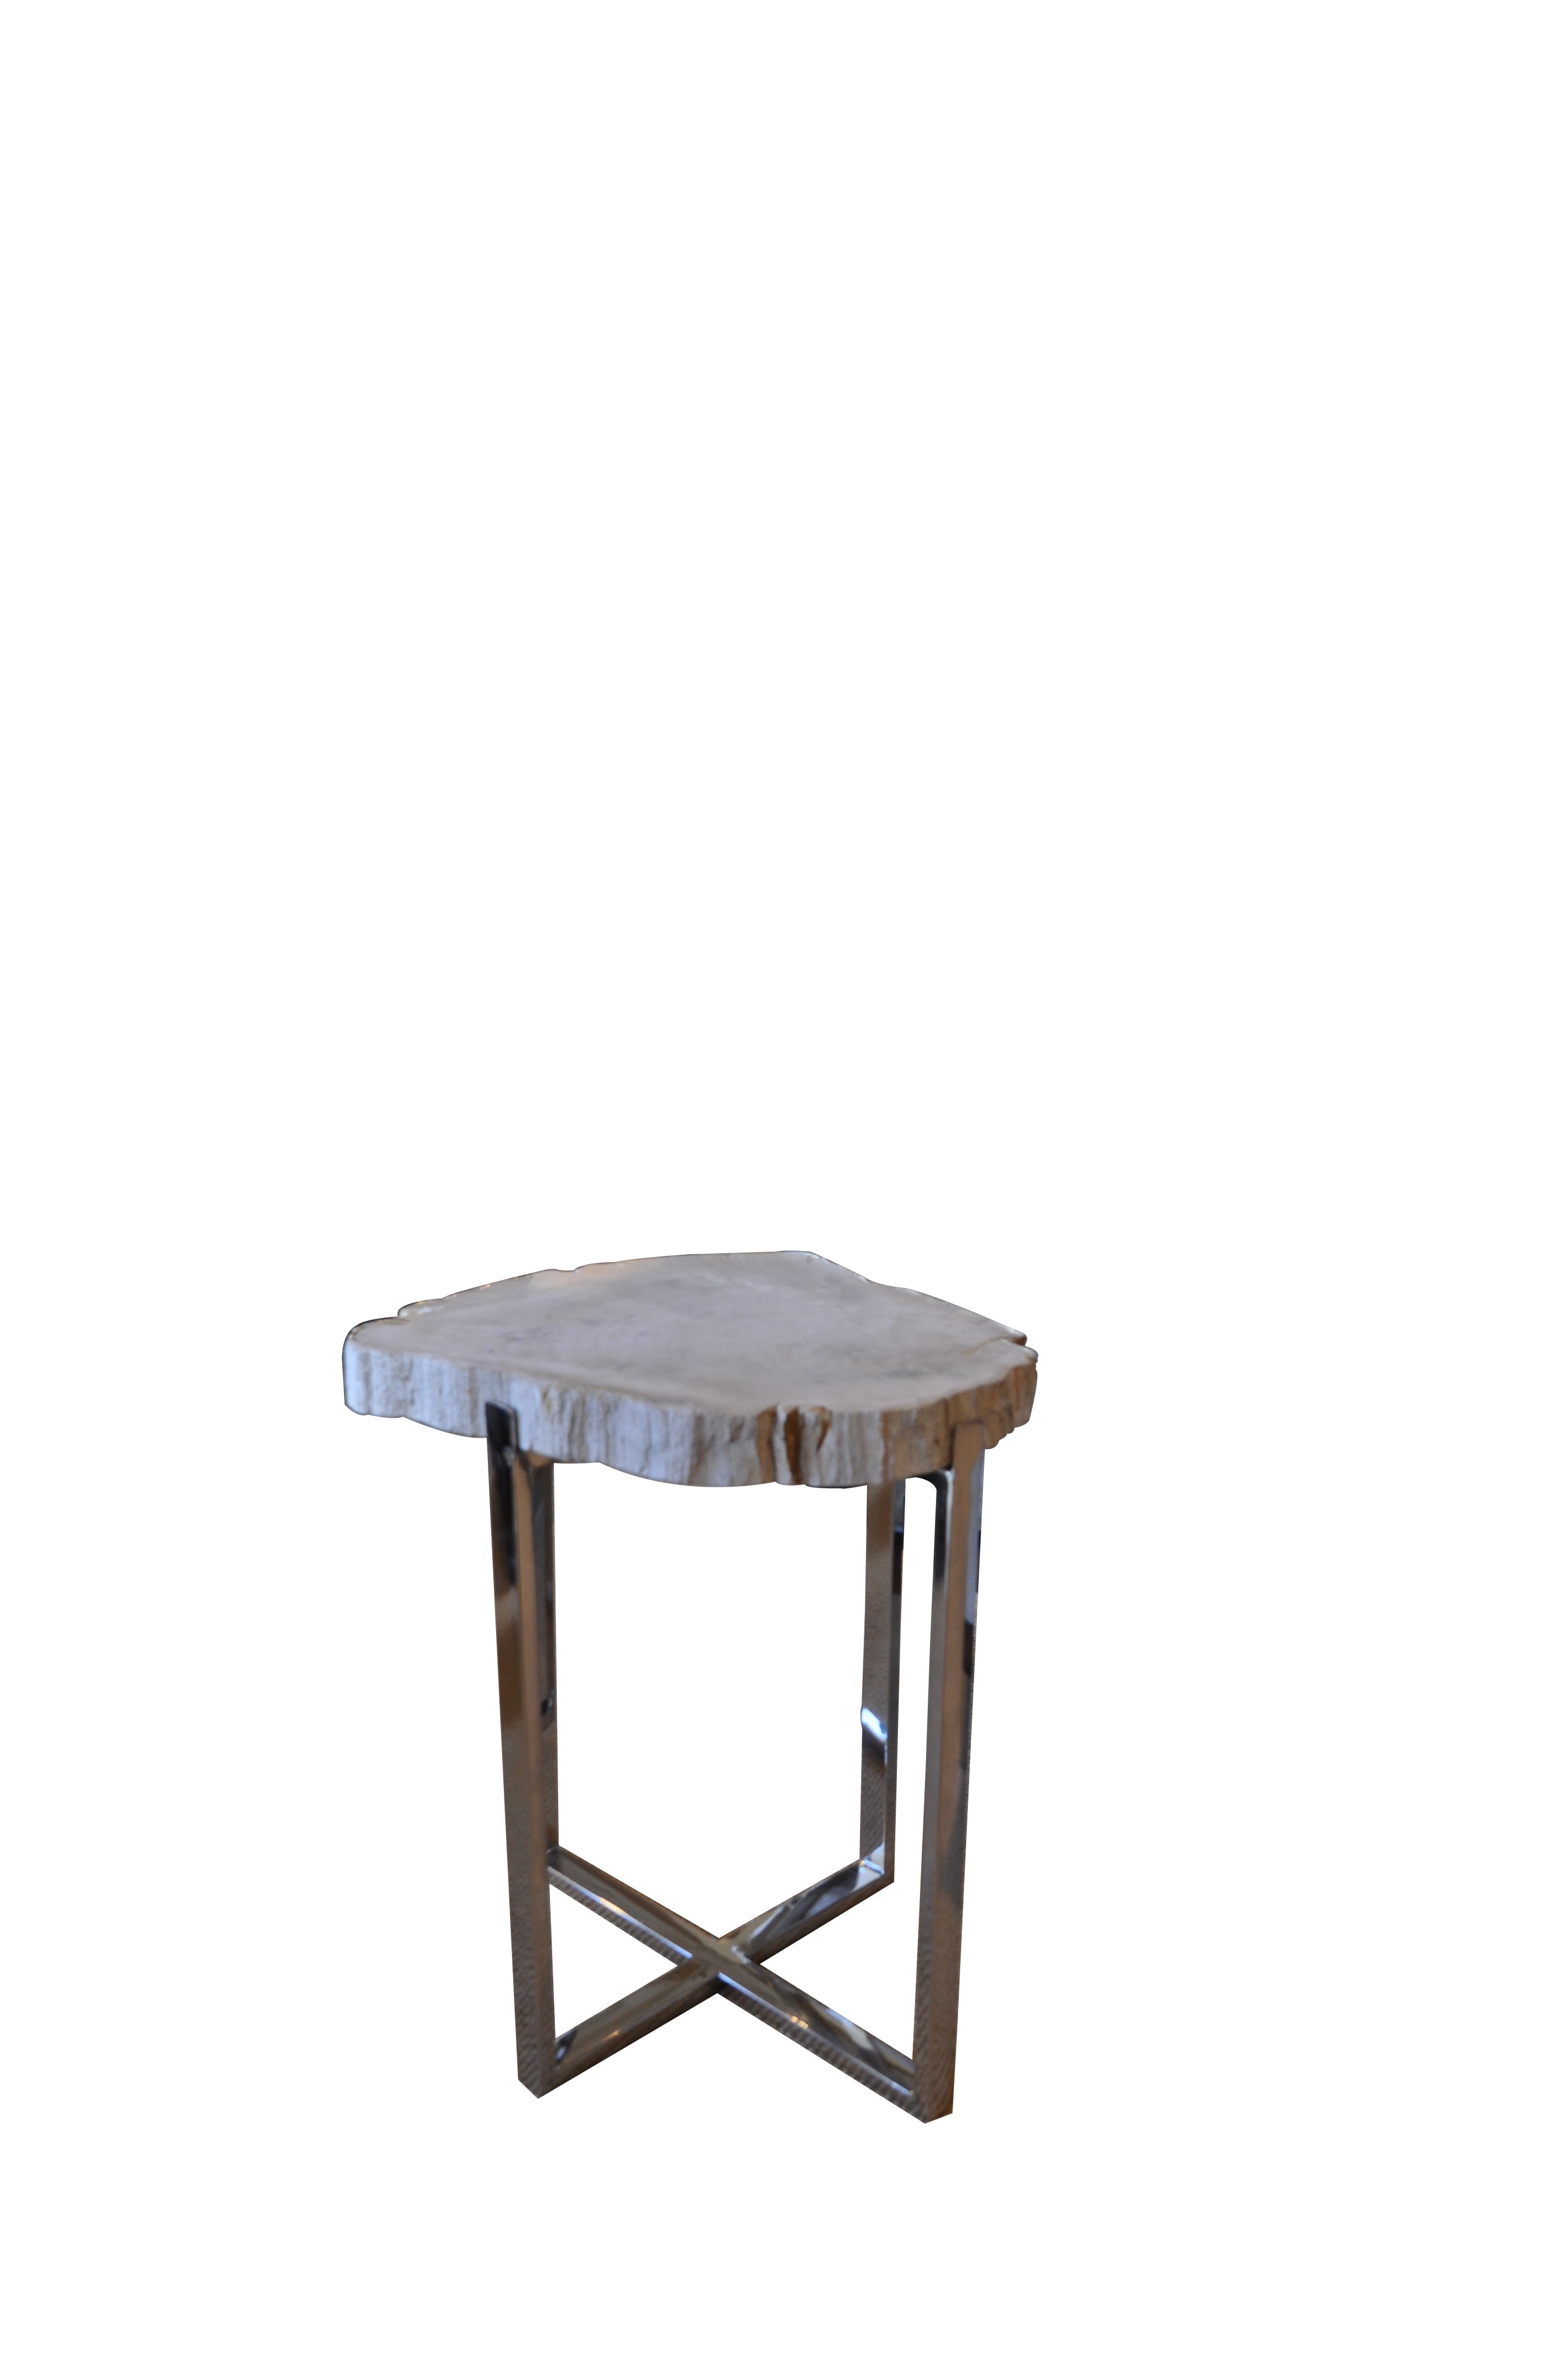 sliced petrified wood accent table large telephone side cherry wedge end narrow console inches deep pier one mirrored hampton bay furniture round plastic tables bath and beyond